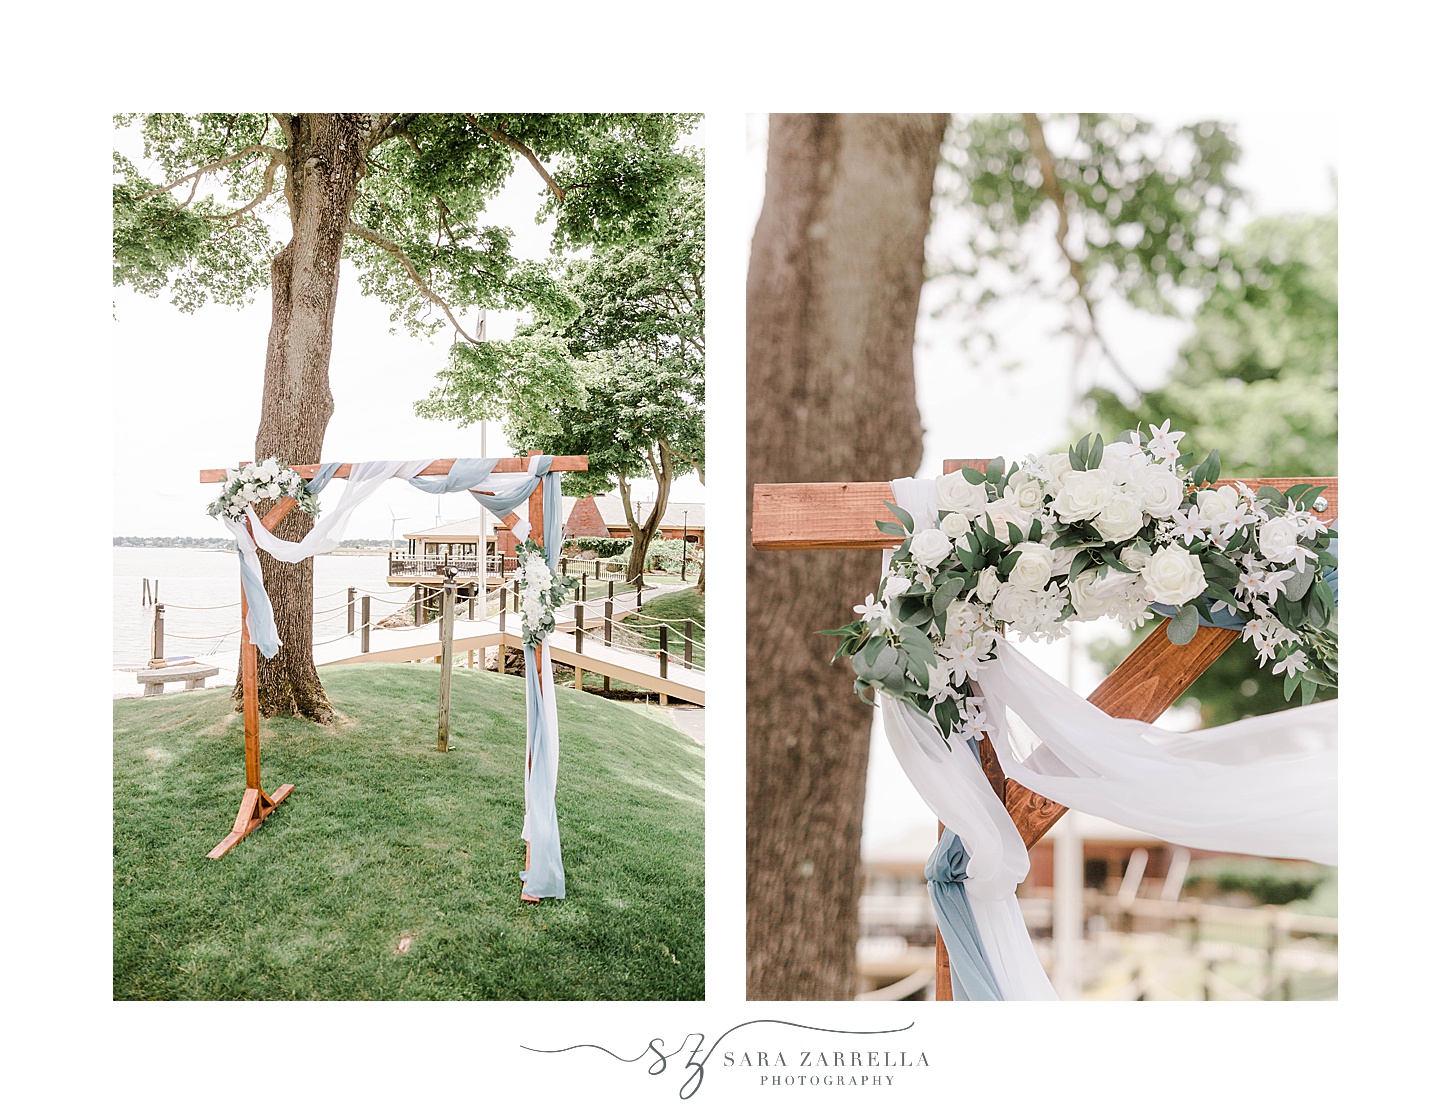 ceremony site with wooden arbor and white flowers